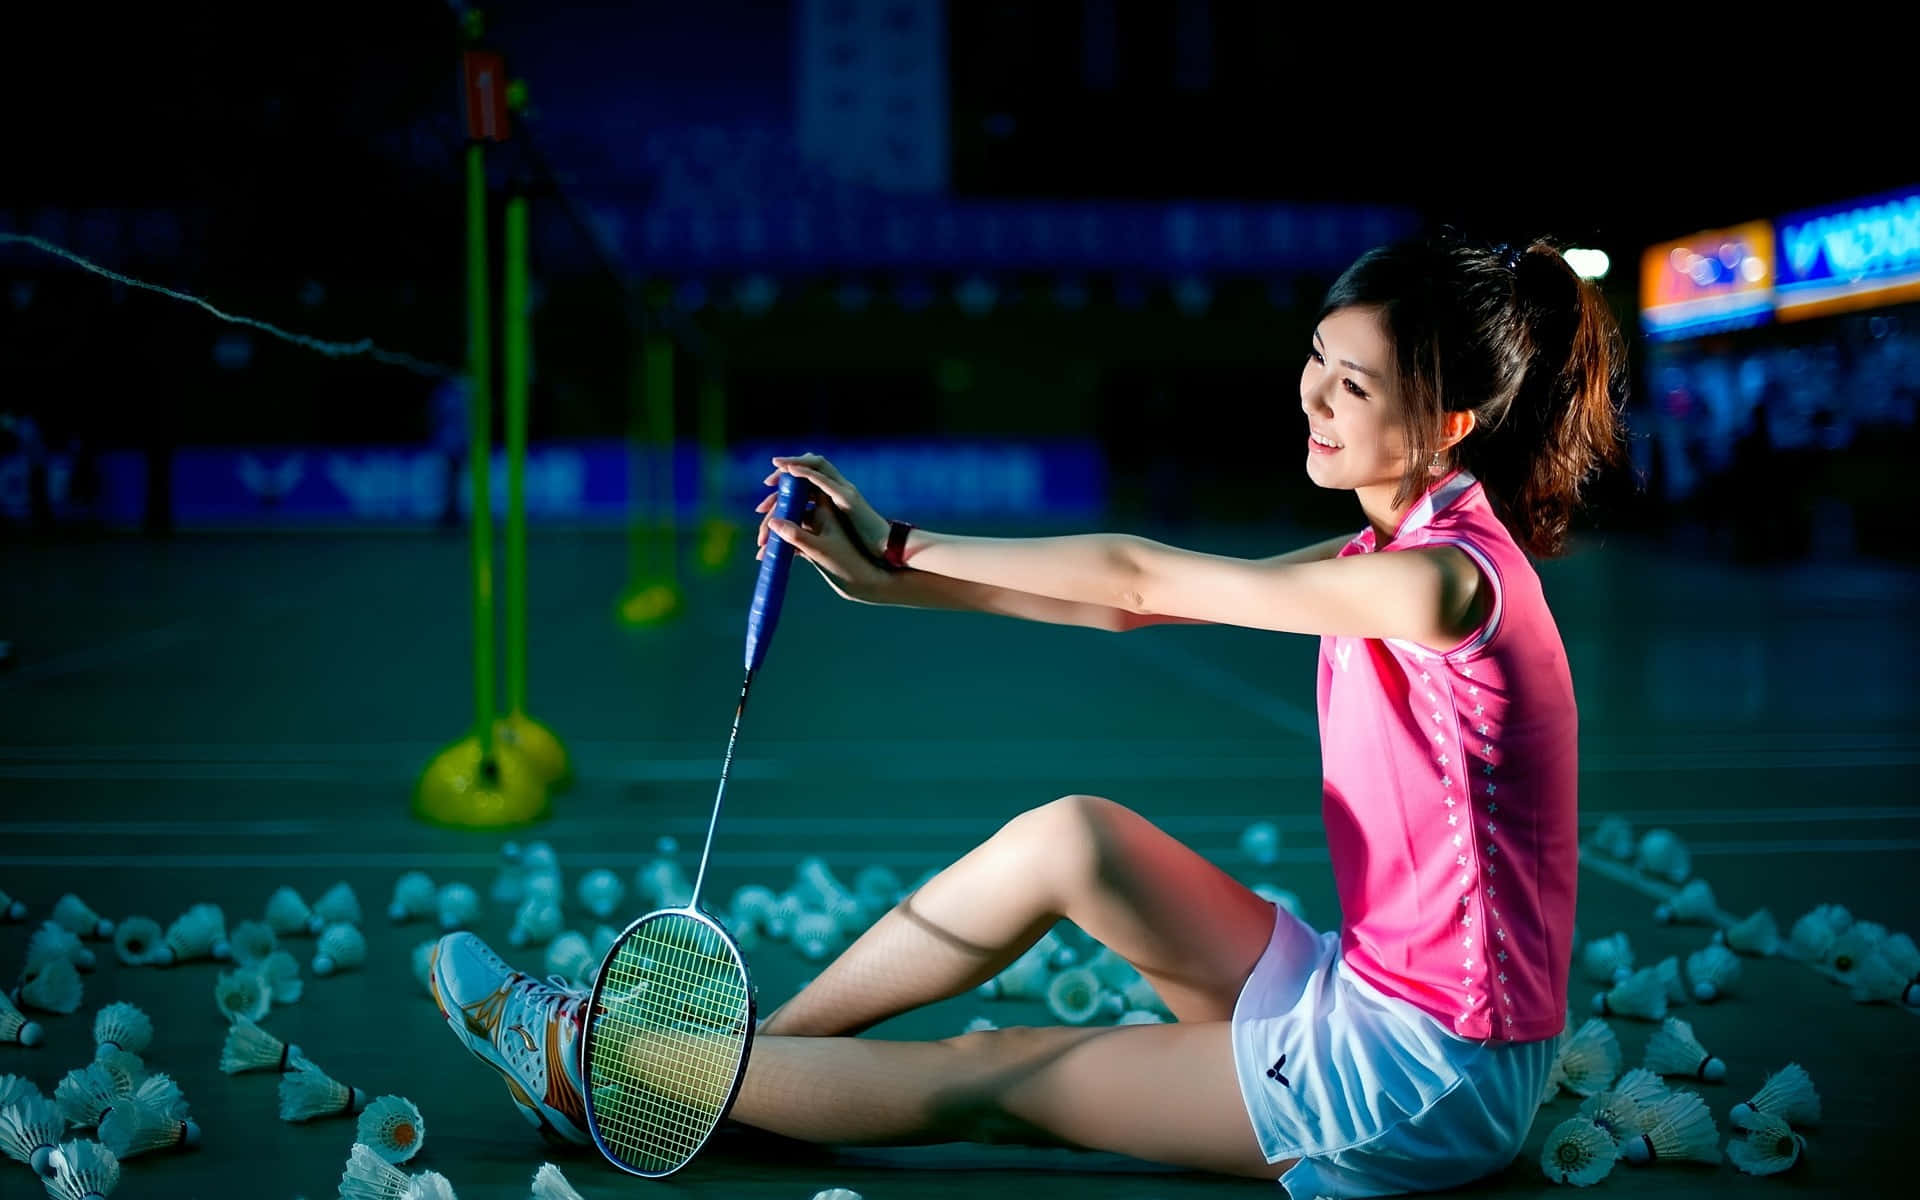 Experience the thrill of victory on the badminton court